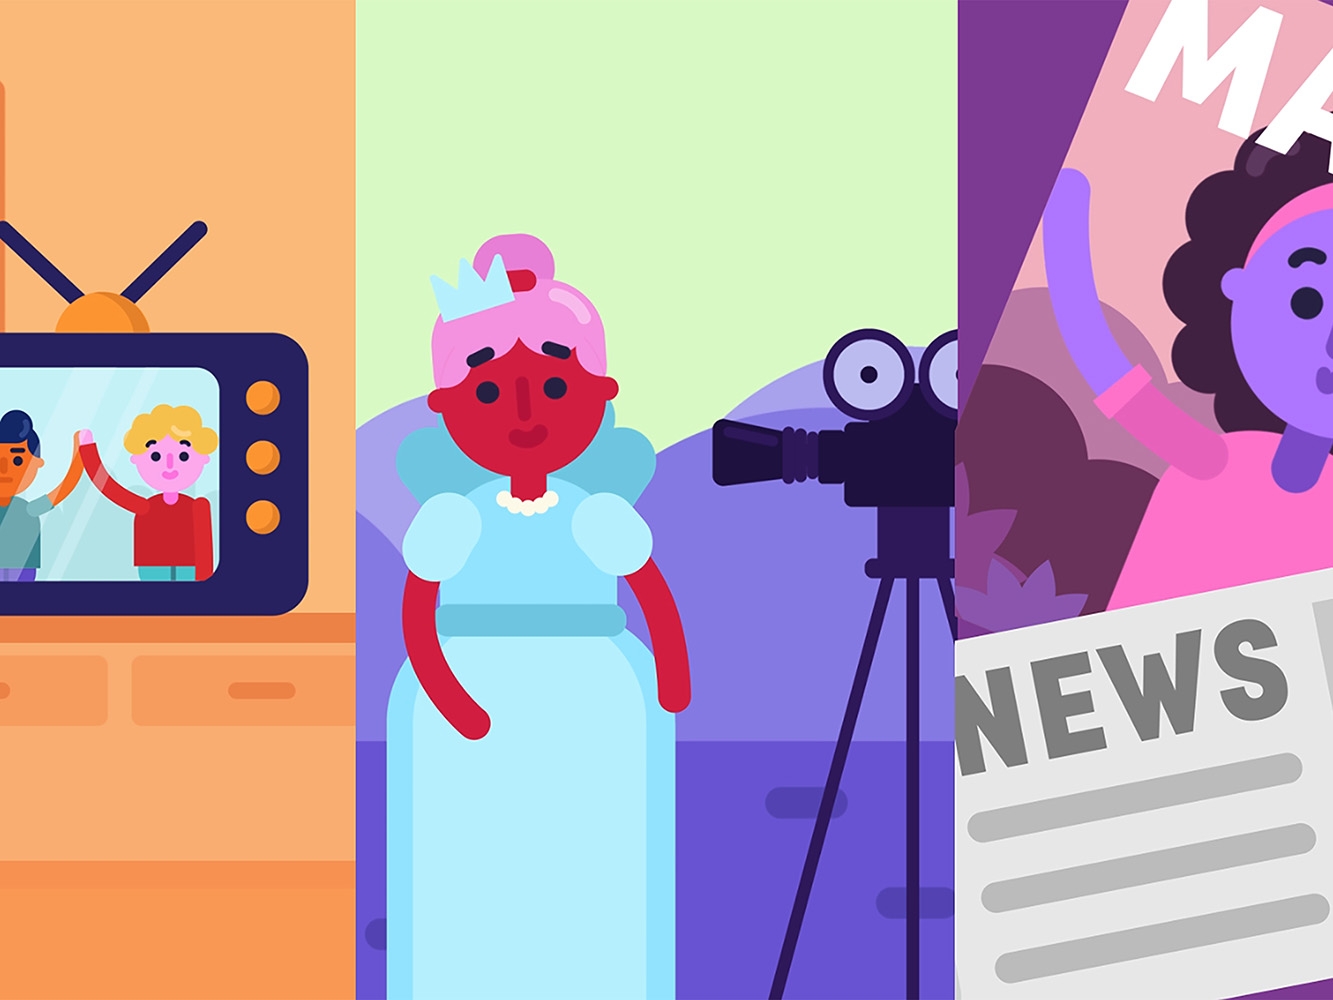 Graphic design split into three images, one of television showing two cartoon people interacting, another showing a cartoon woman speaking to a video camera and another of a newspaper and magazine ove